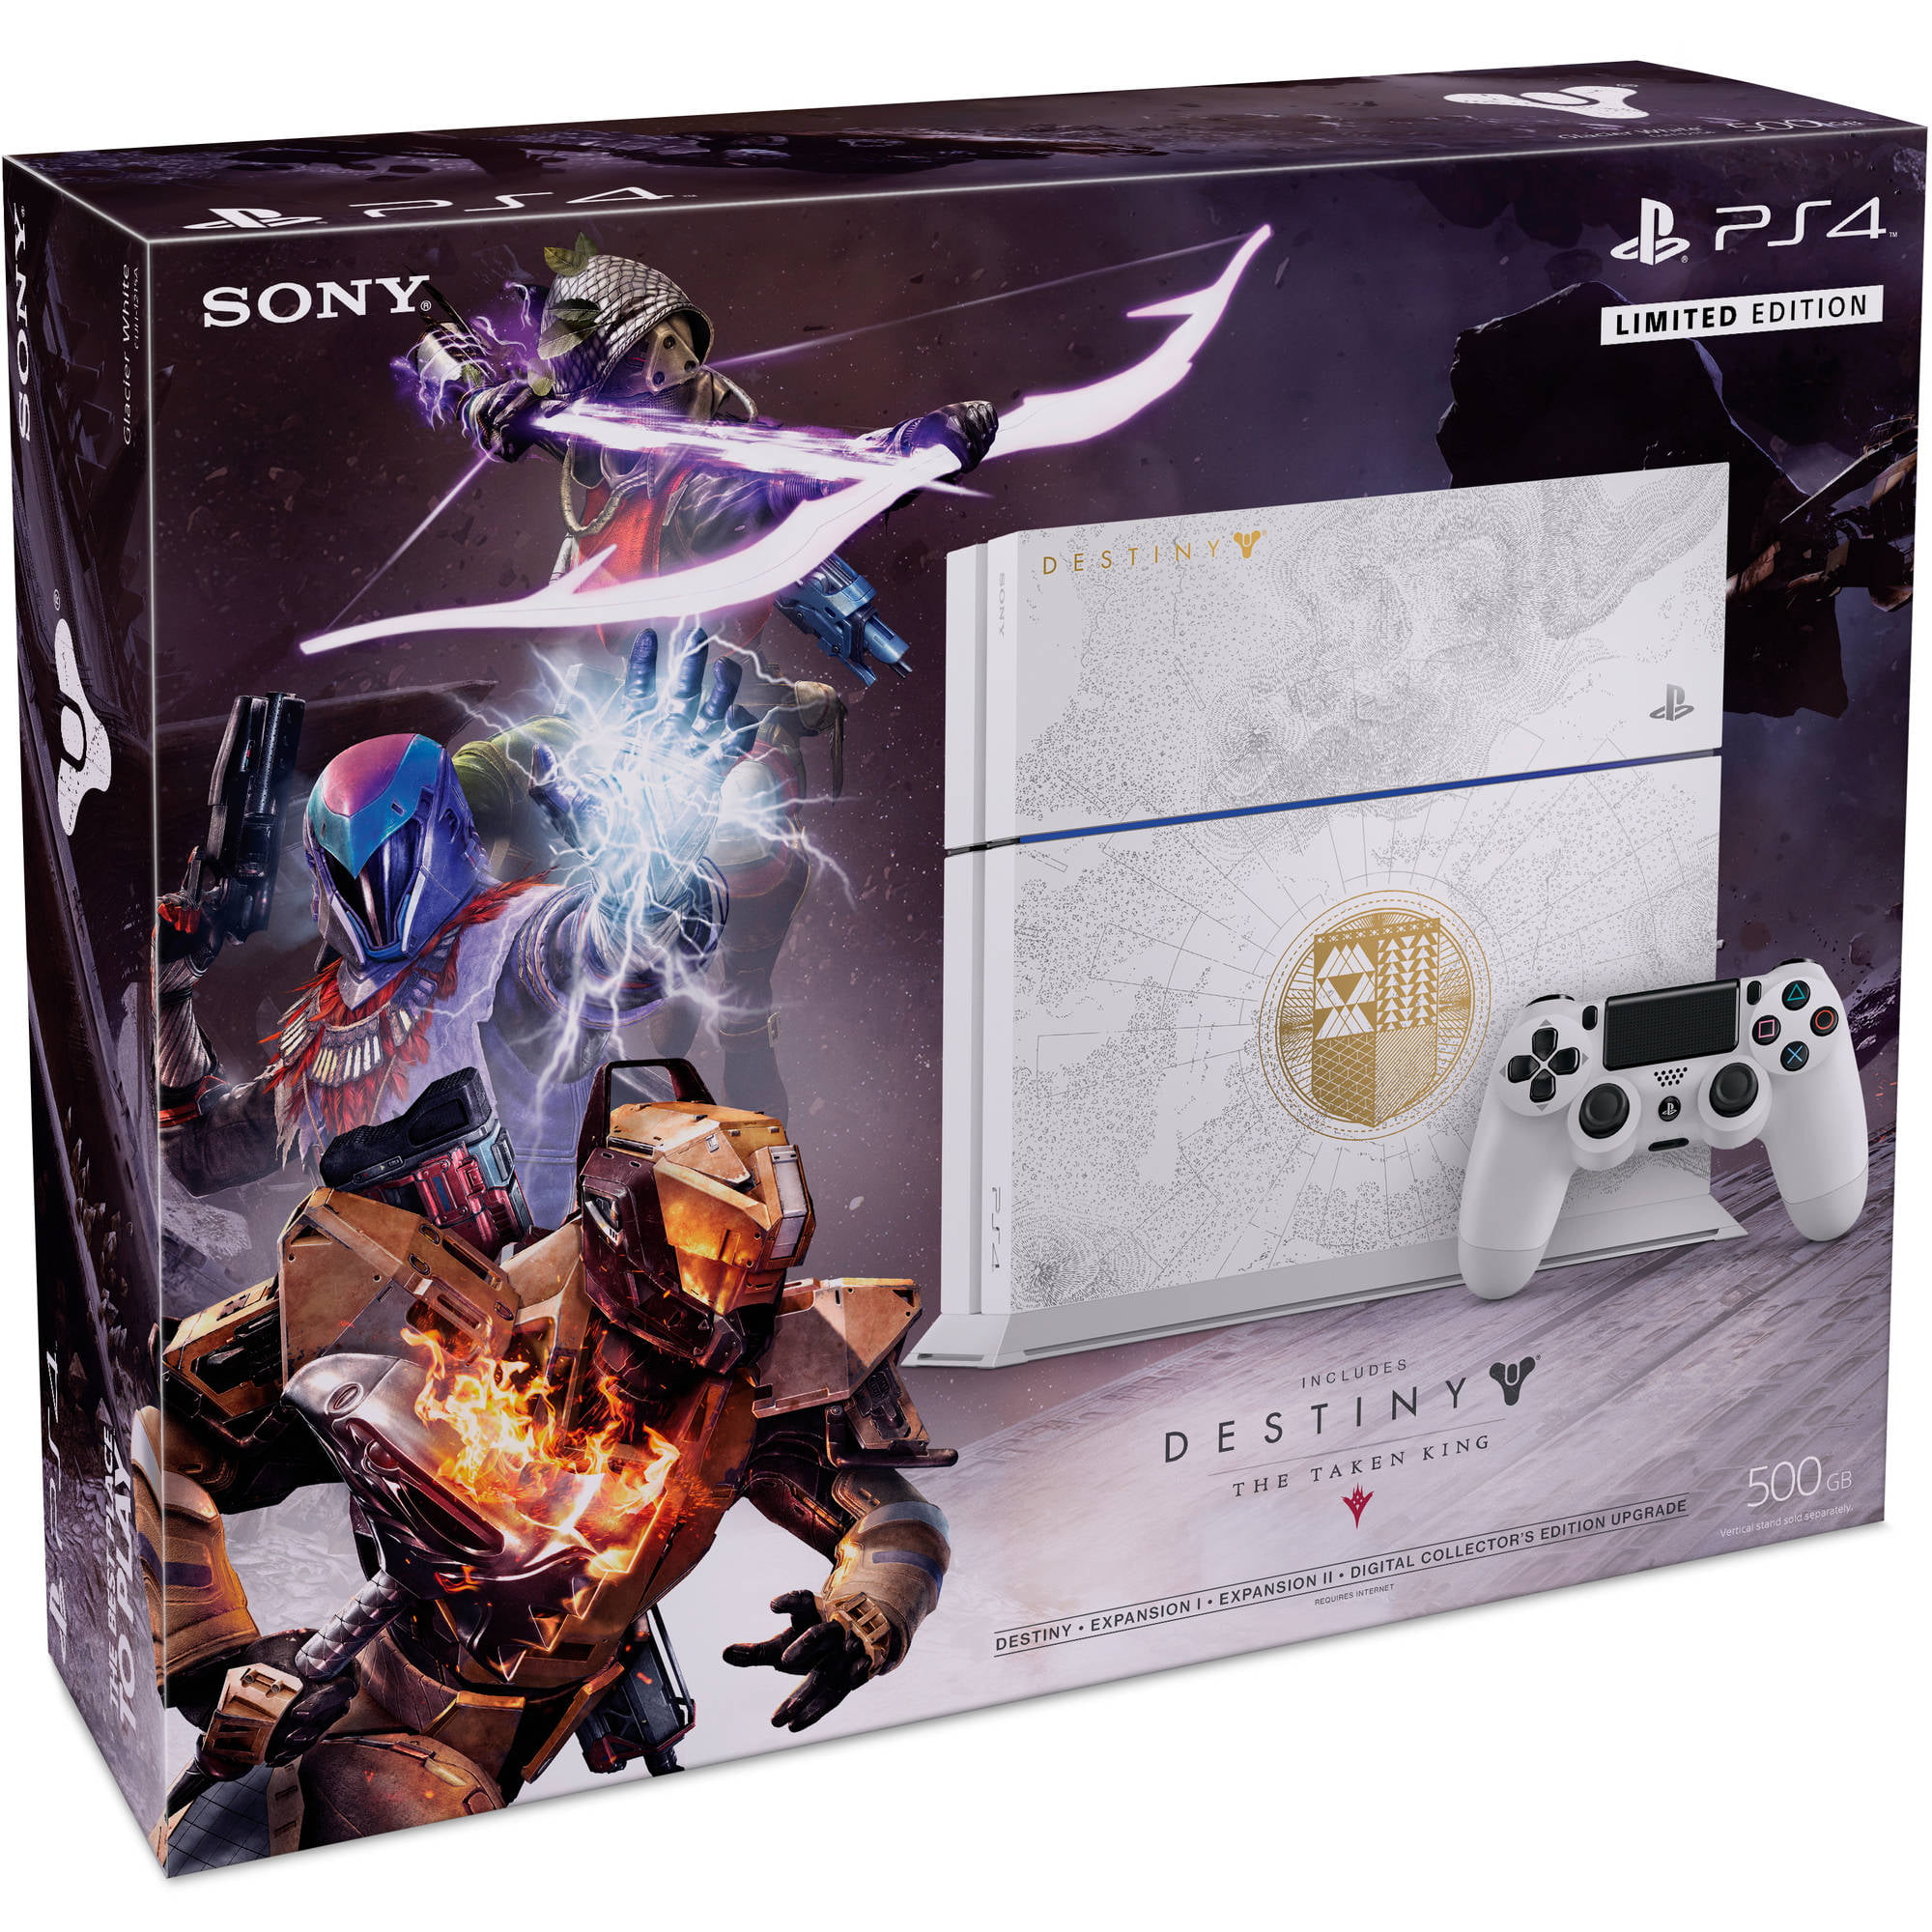 PlayStation 4 Pro 1TB Limited Edition Console - Destiny 2 Bundle  [Discontinued]